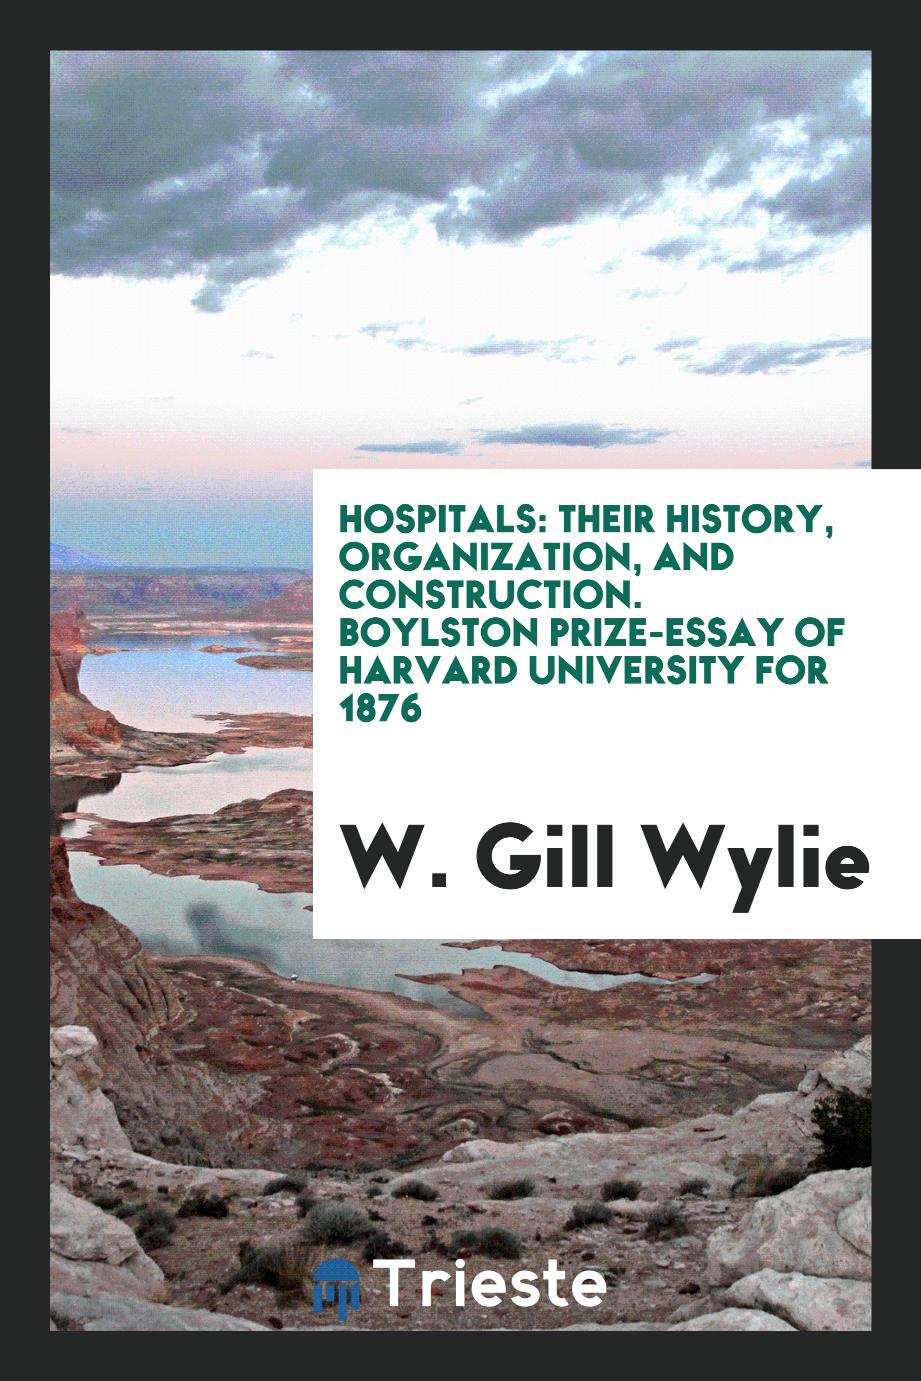 Hospitals: Their History, Organization, and Construction. Boylston Prize-Essay of Harvard University for 1876